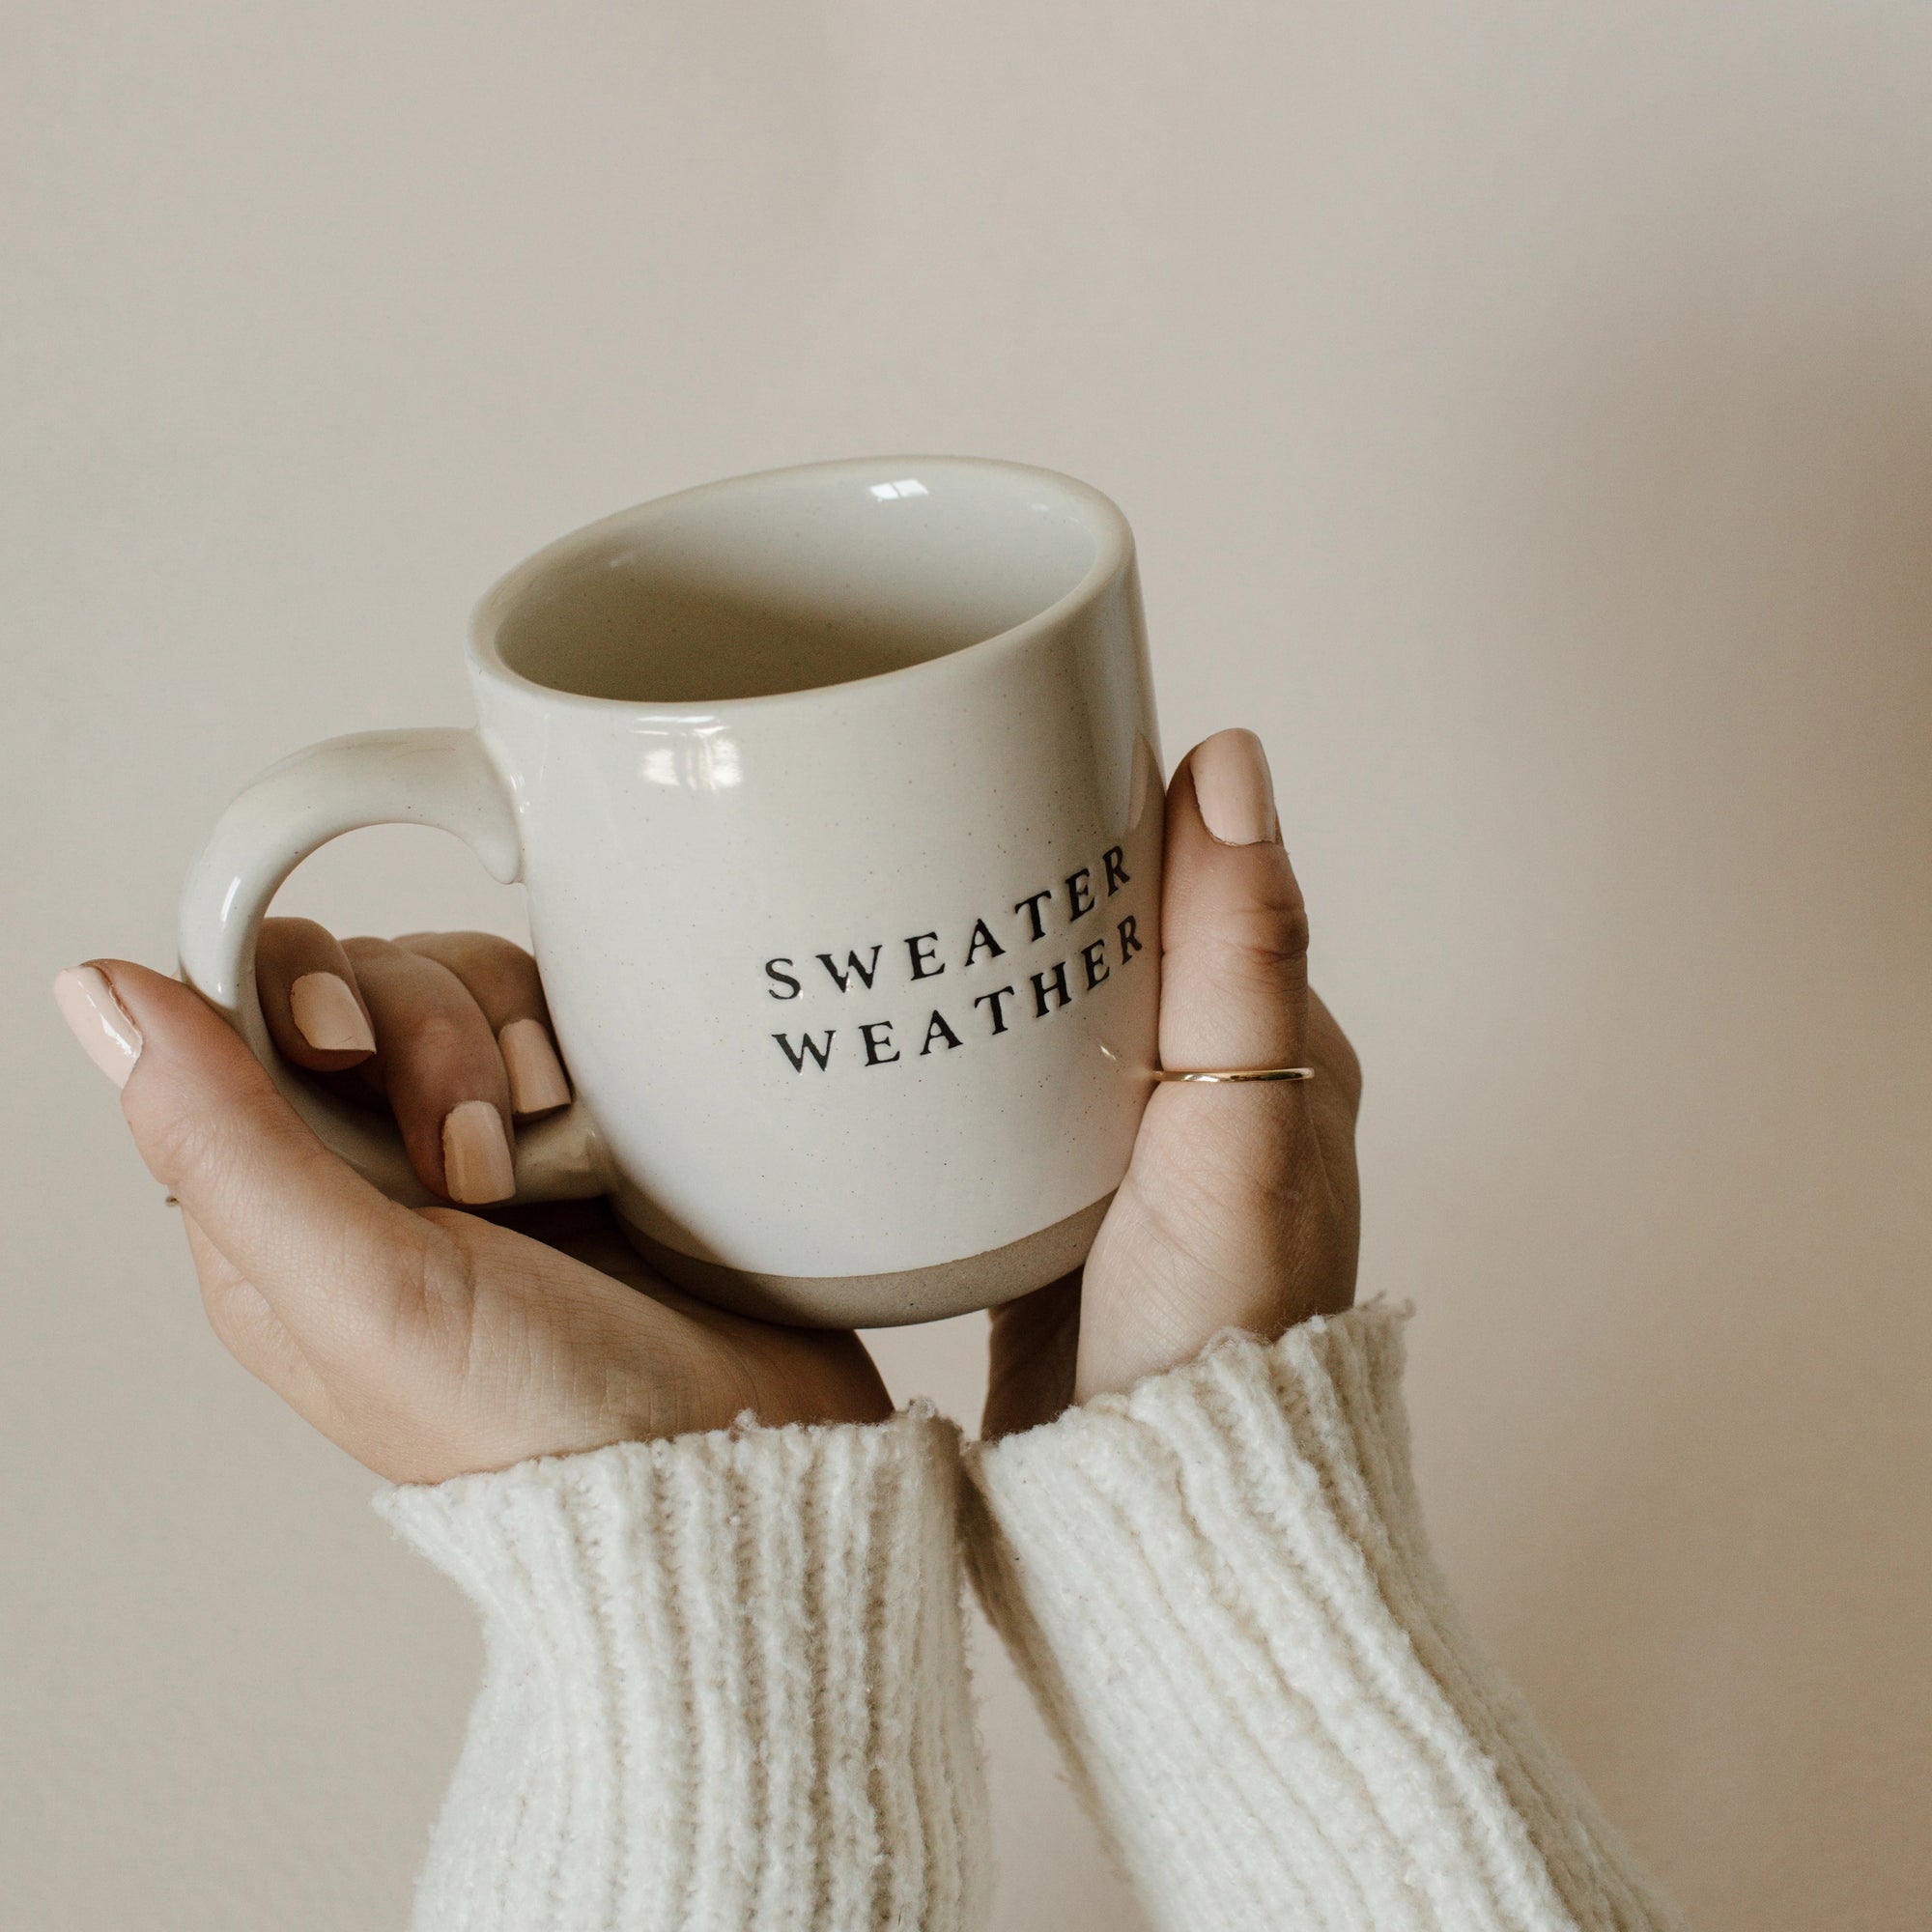 White and brown natural stoneware mug with black 'sweater weather' text, held in two hands.